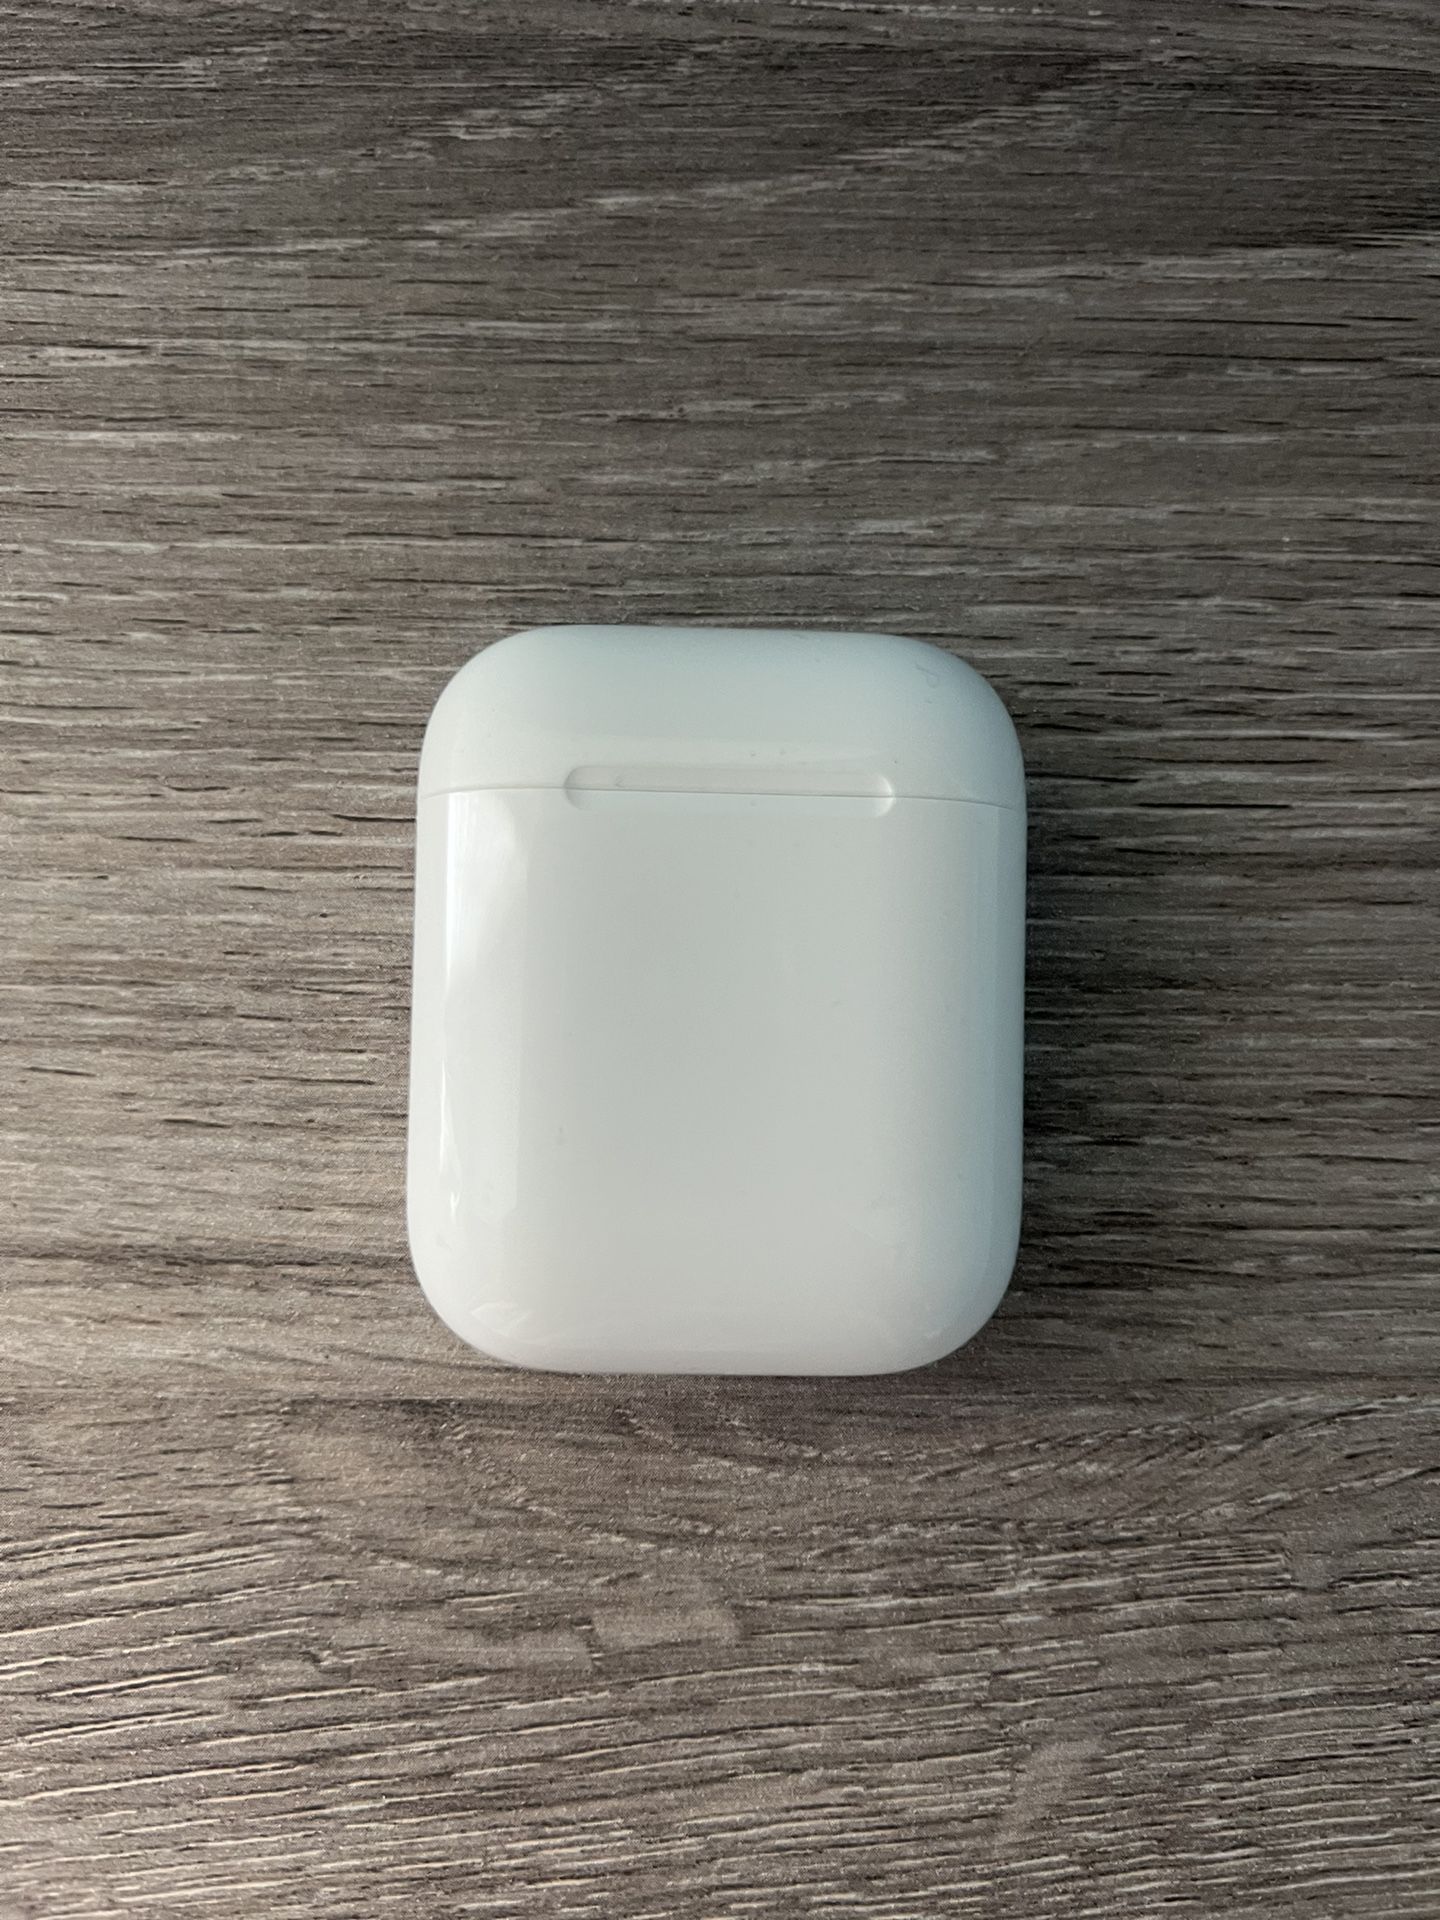 Apple Airpods Case 